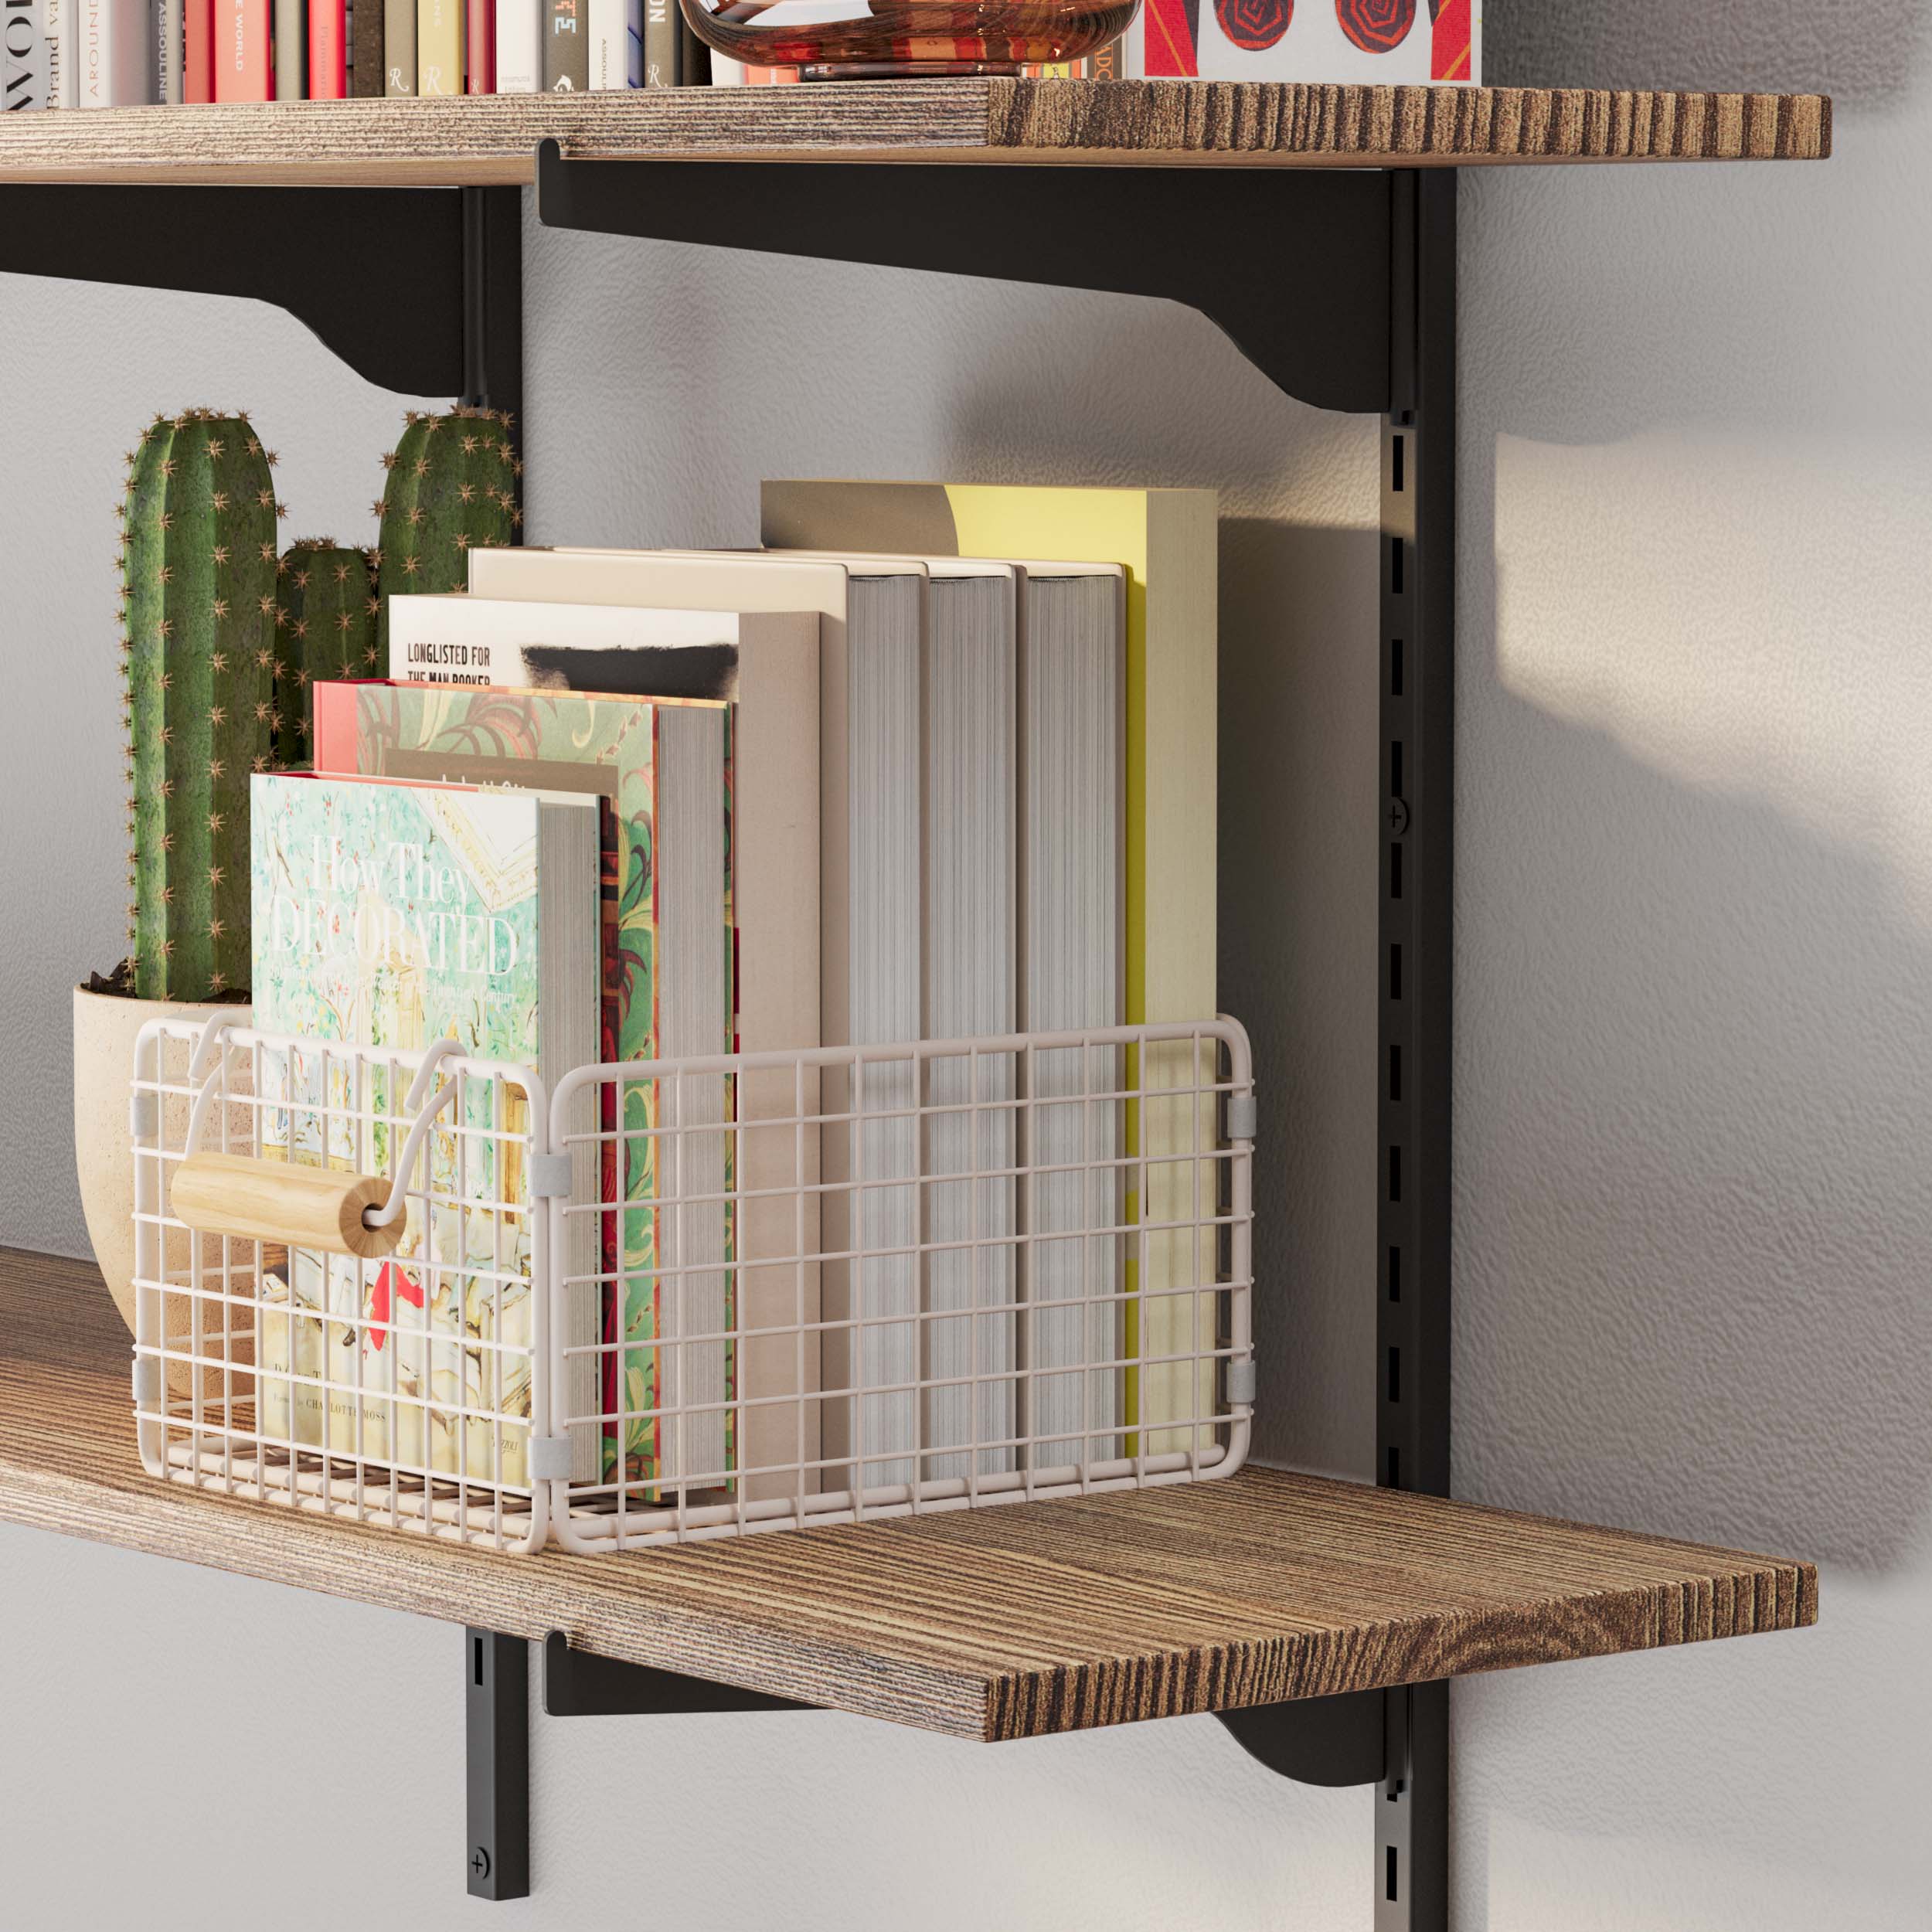 Close-up of a burnt wall mounted shelf with a cactus and a wire basket holding books, showcasing the textured wood surface and black brackets.